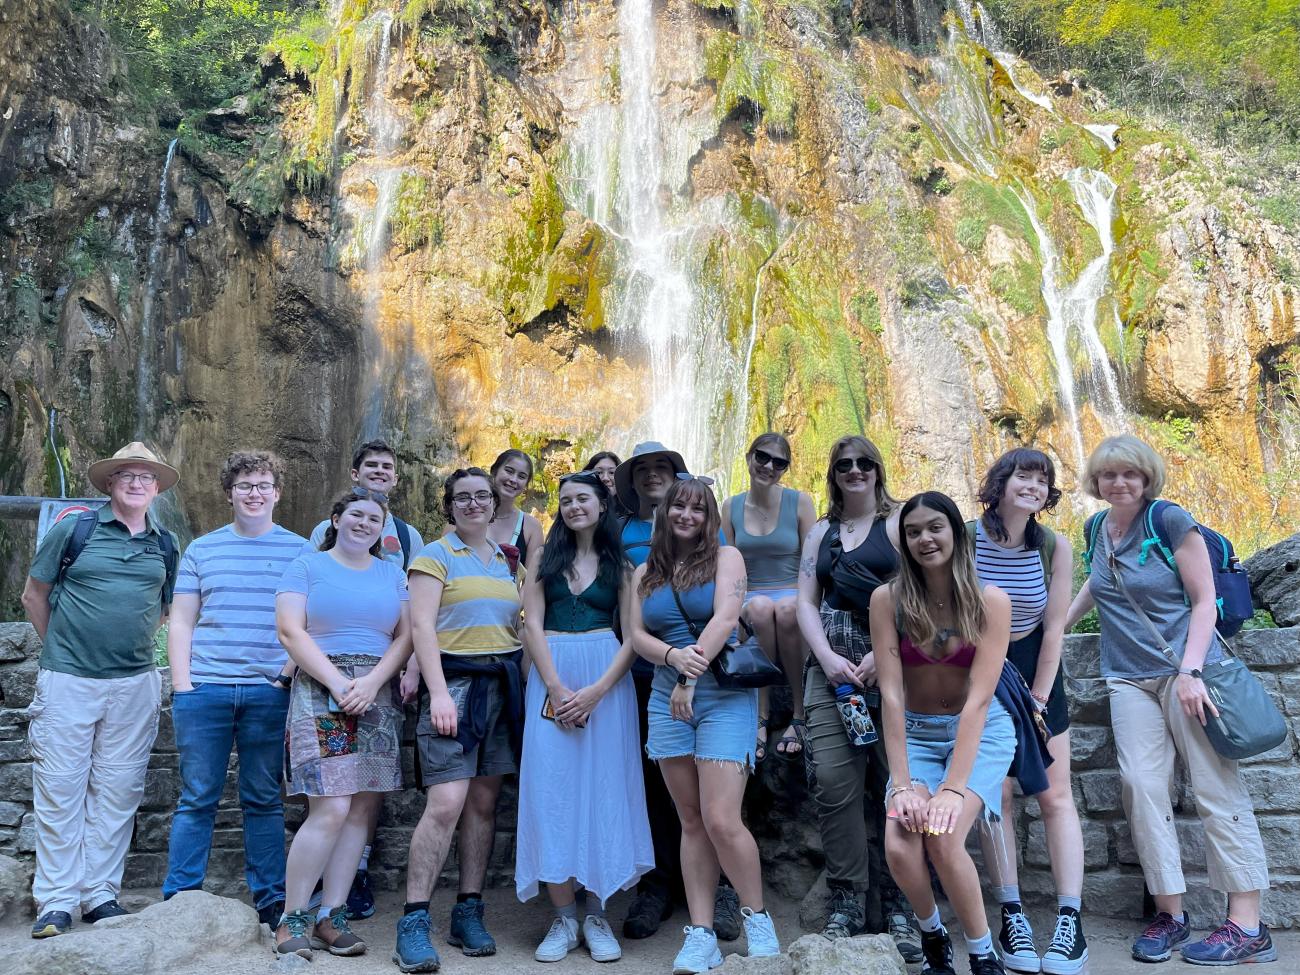 Group photo in front of a waterfall in Plitvice Lakes National Park